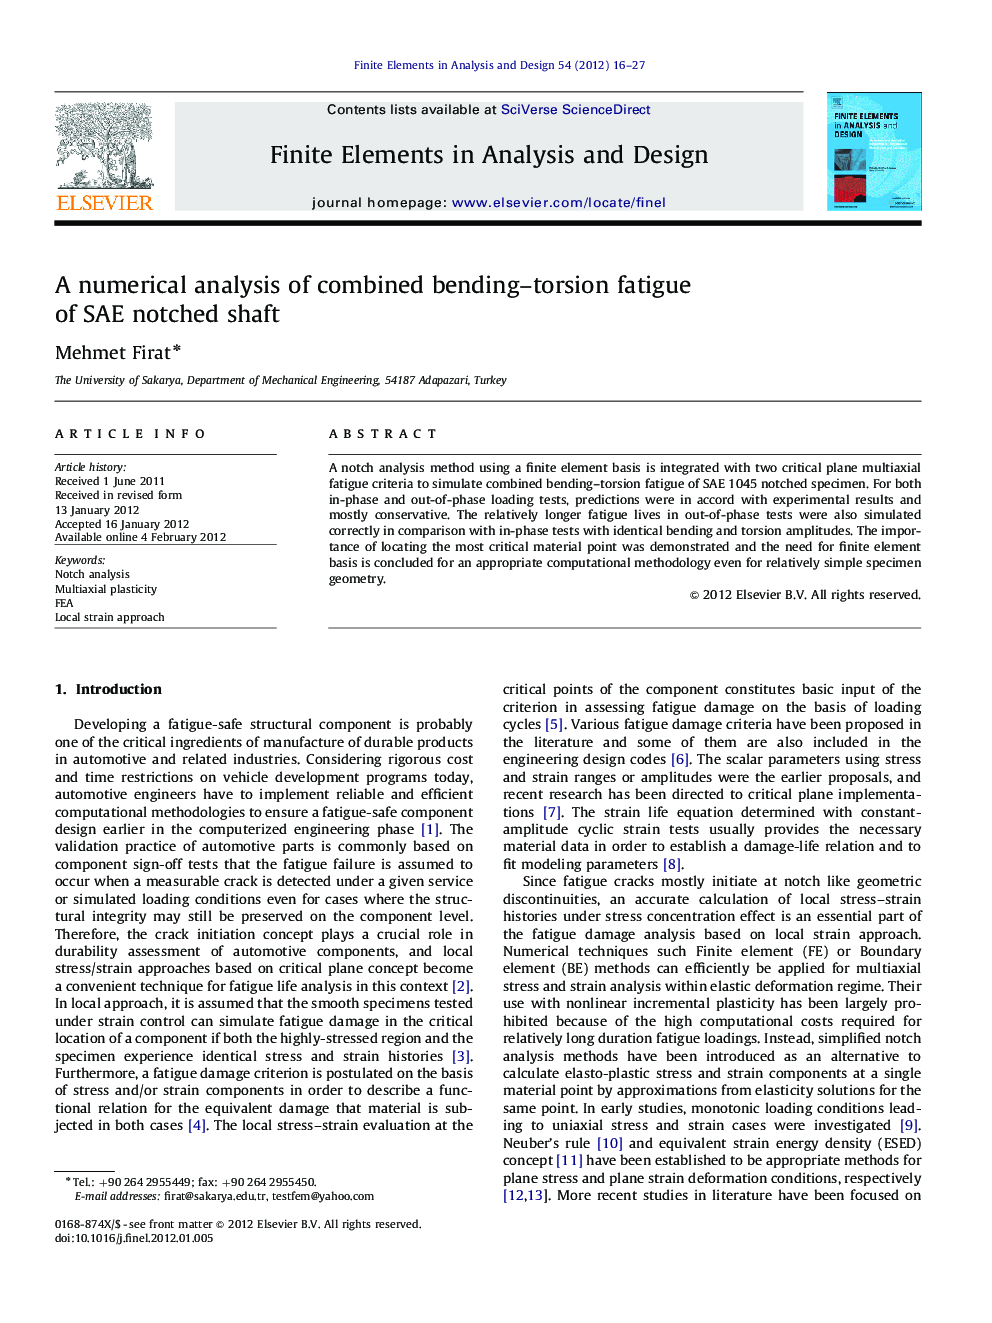 A numerical analysis of combined bending–torsion fatigue of SAE notched shaft